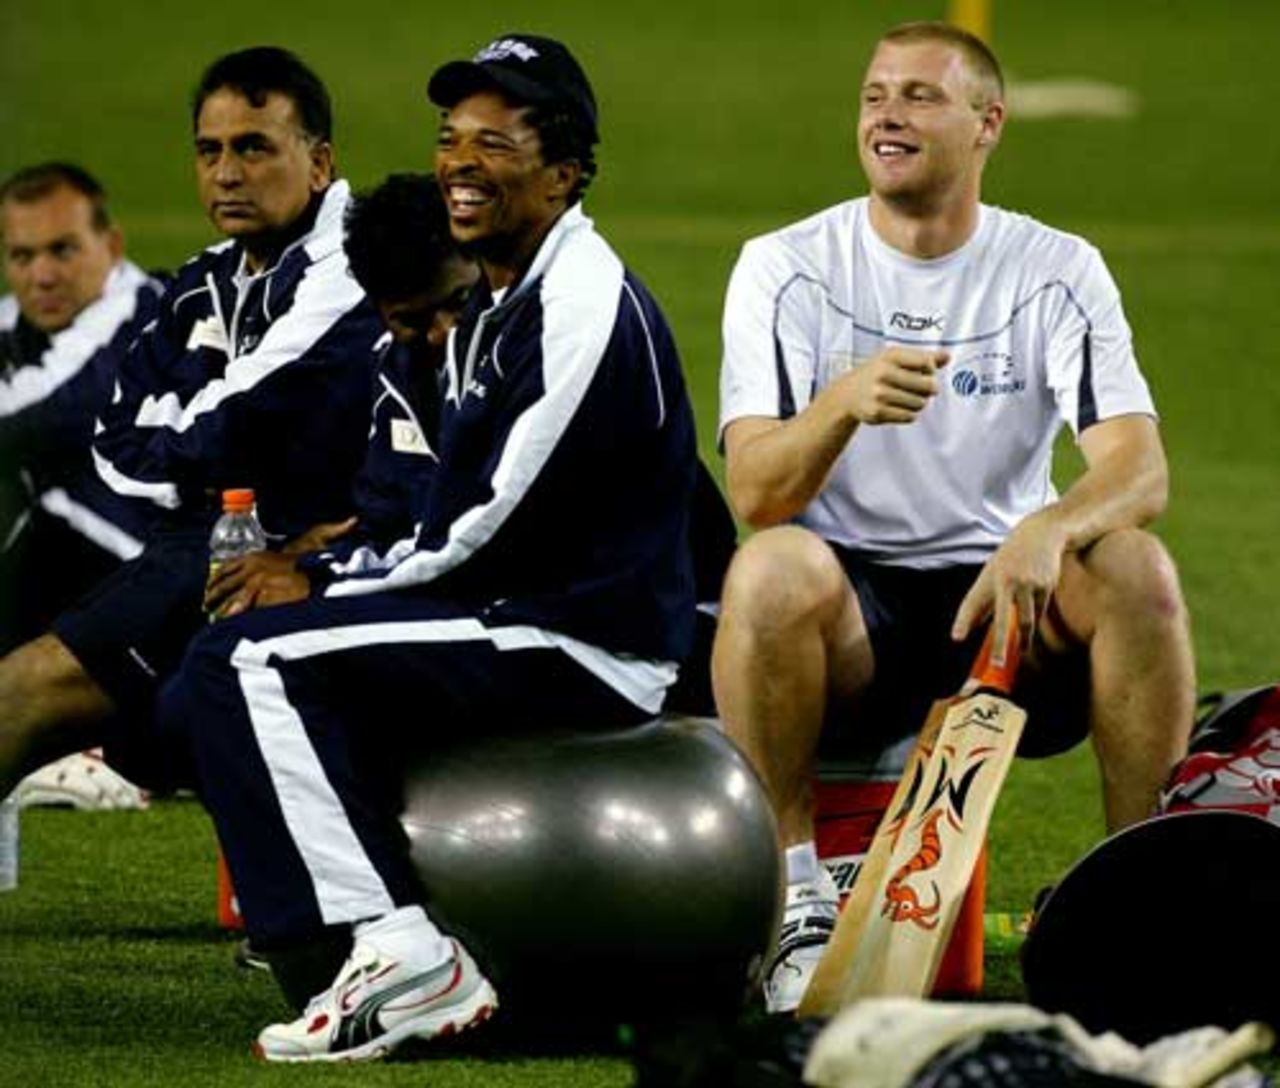 Makhaya Ntini and Andrew Flintoff in relaxed mood during a training session ahead of the ICC Super Series Trophy, Melbourne, October 3, 2005